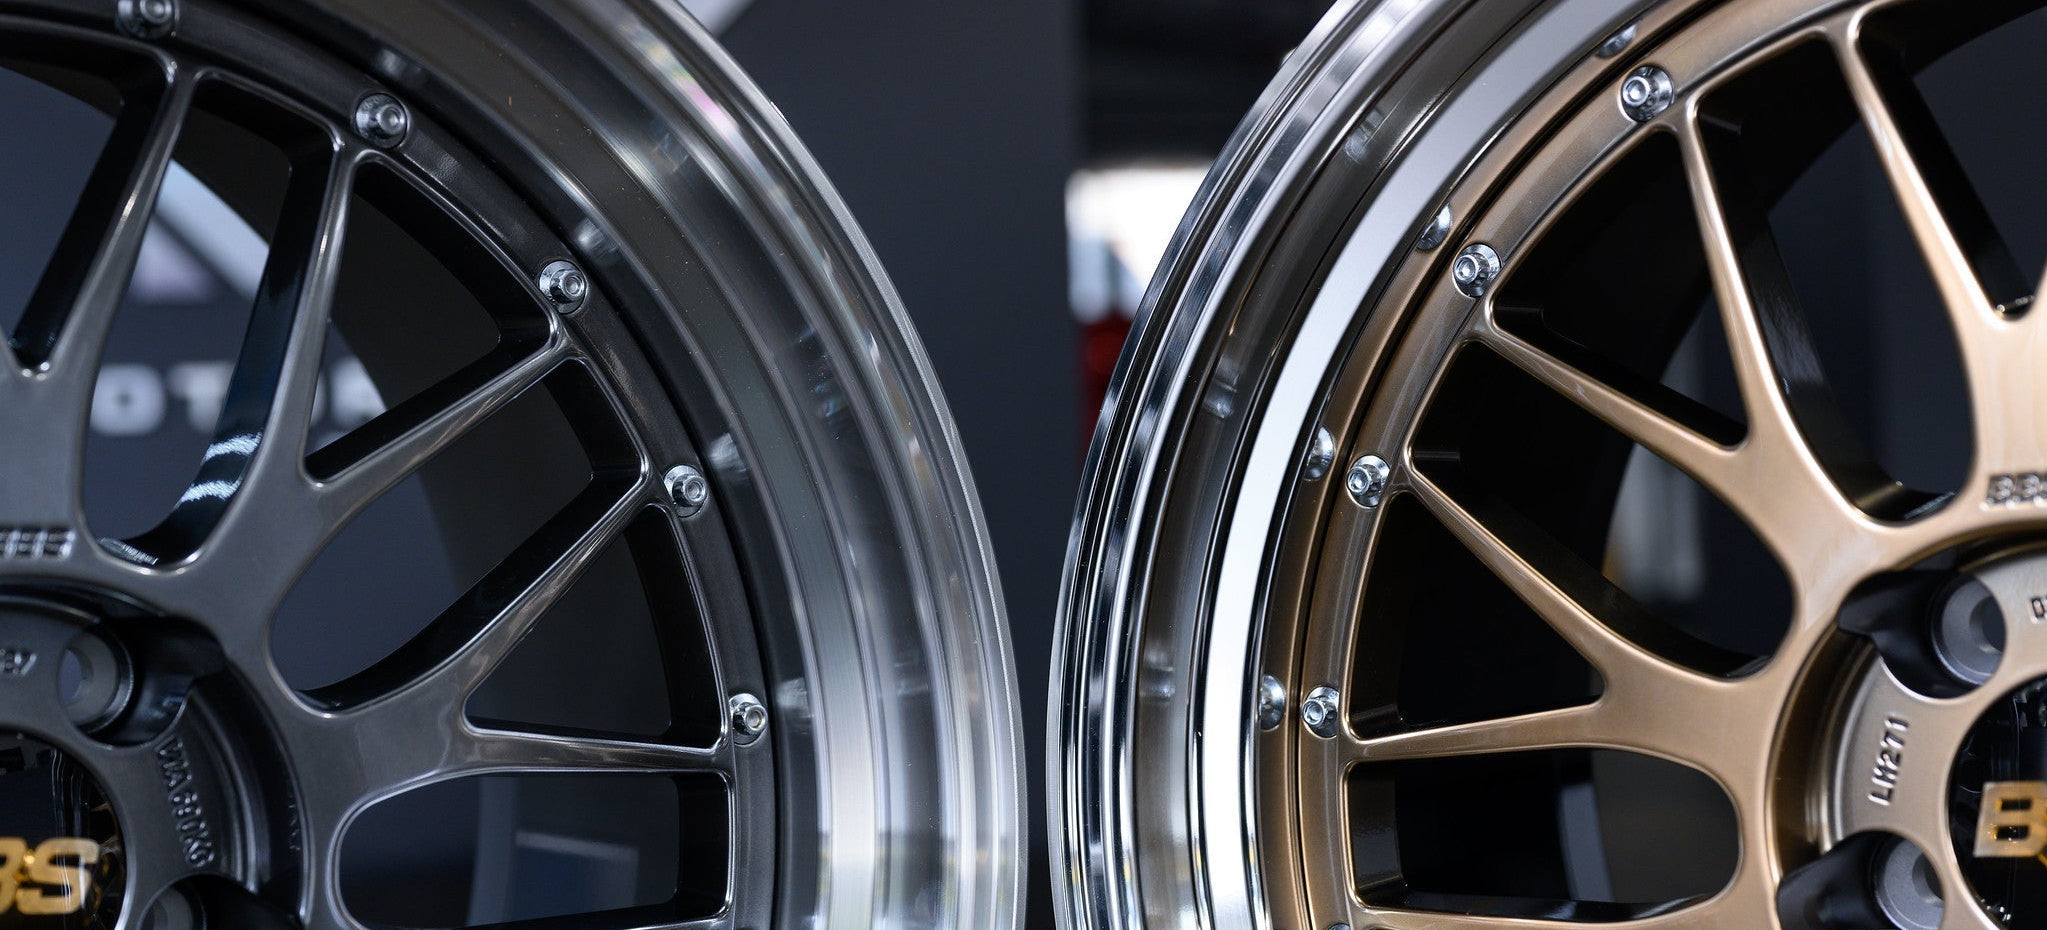 BBS LM for G8x M3 & M4 - Premium Wheels from BBS Japan - From just $8690.0! Shop now at MK MOTORSPORTS